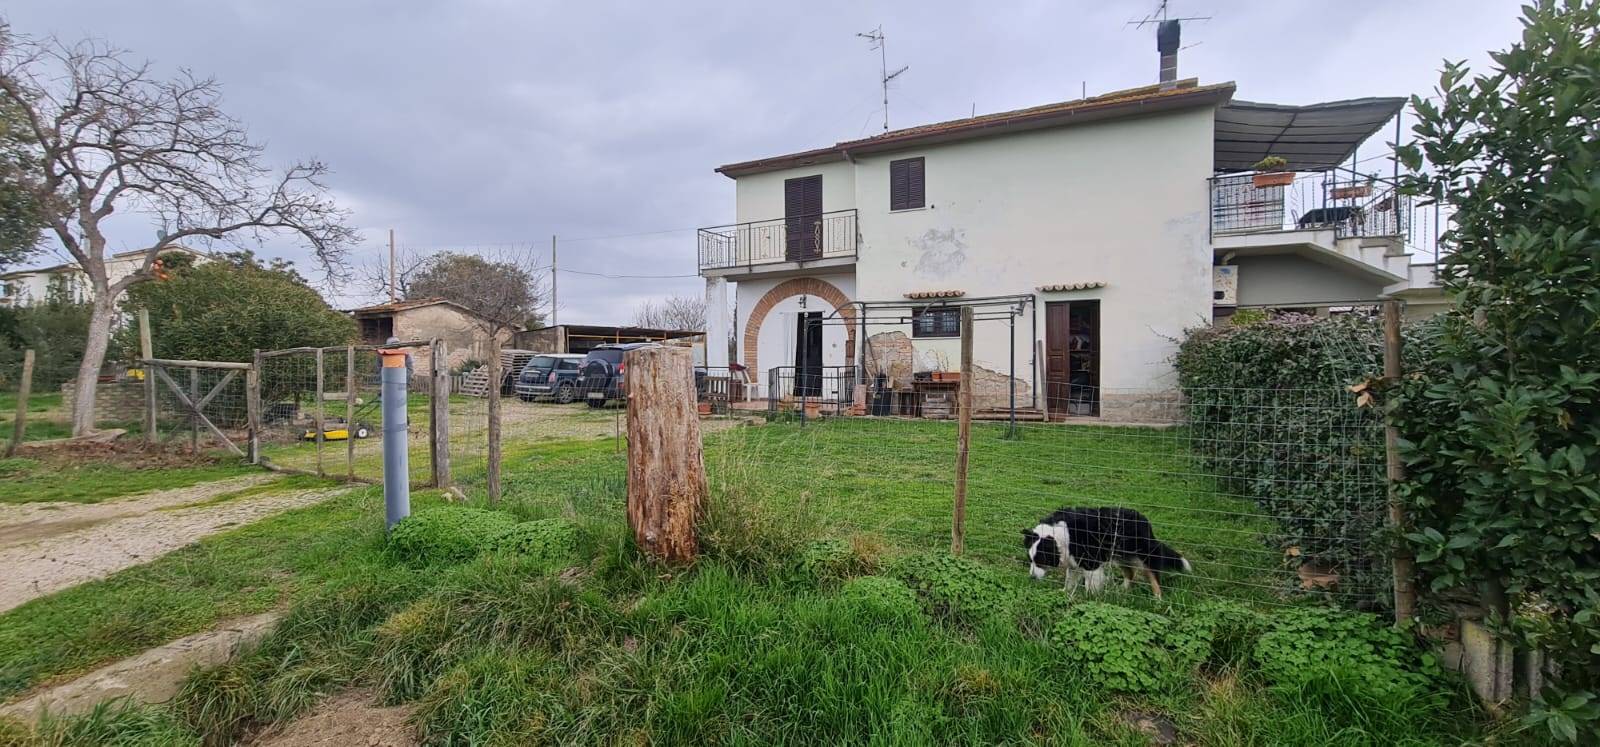 STICCIANO SCALO, ROCCASTRADA, Semi detached house for sale of 80 Sq. mt., Good condition, Heating Individual heating system, Energetic class: G, Epi: 